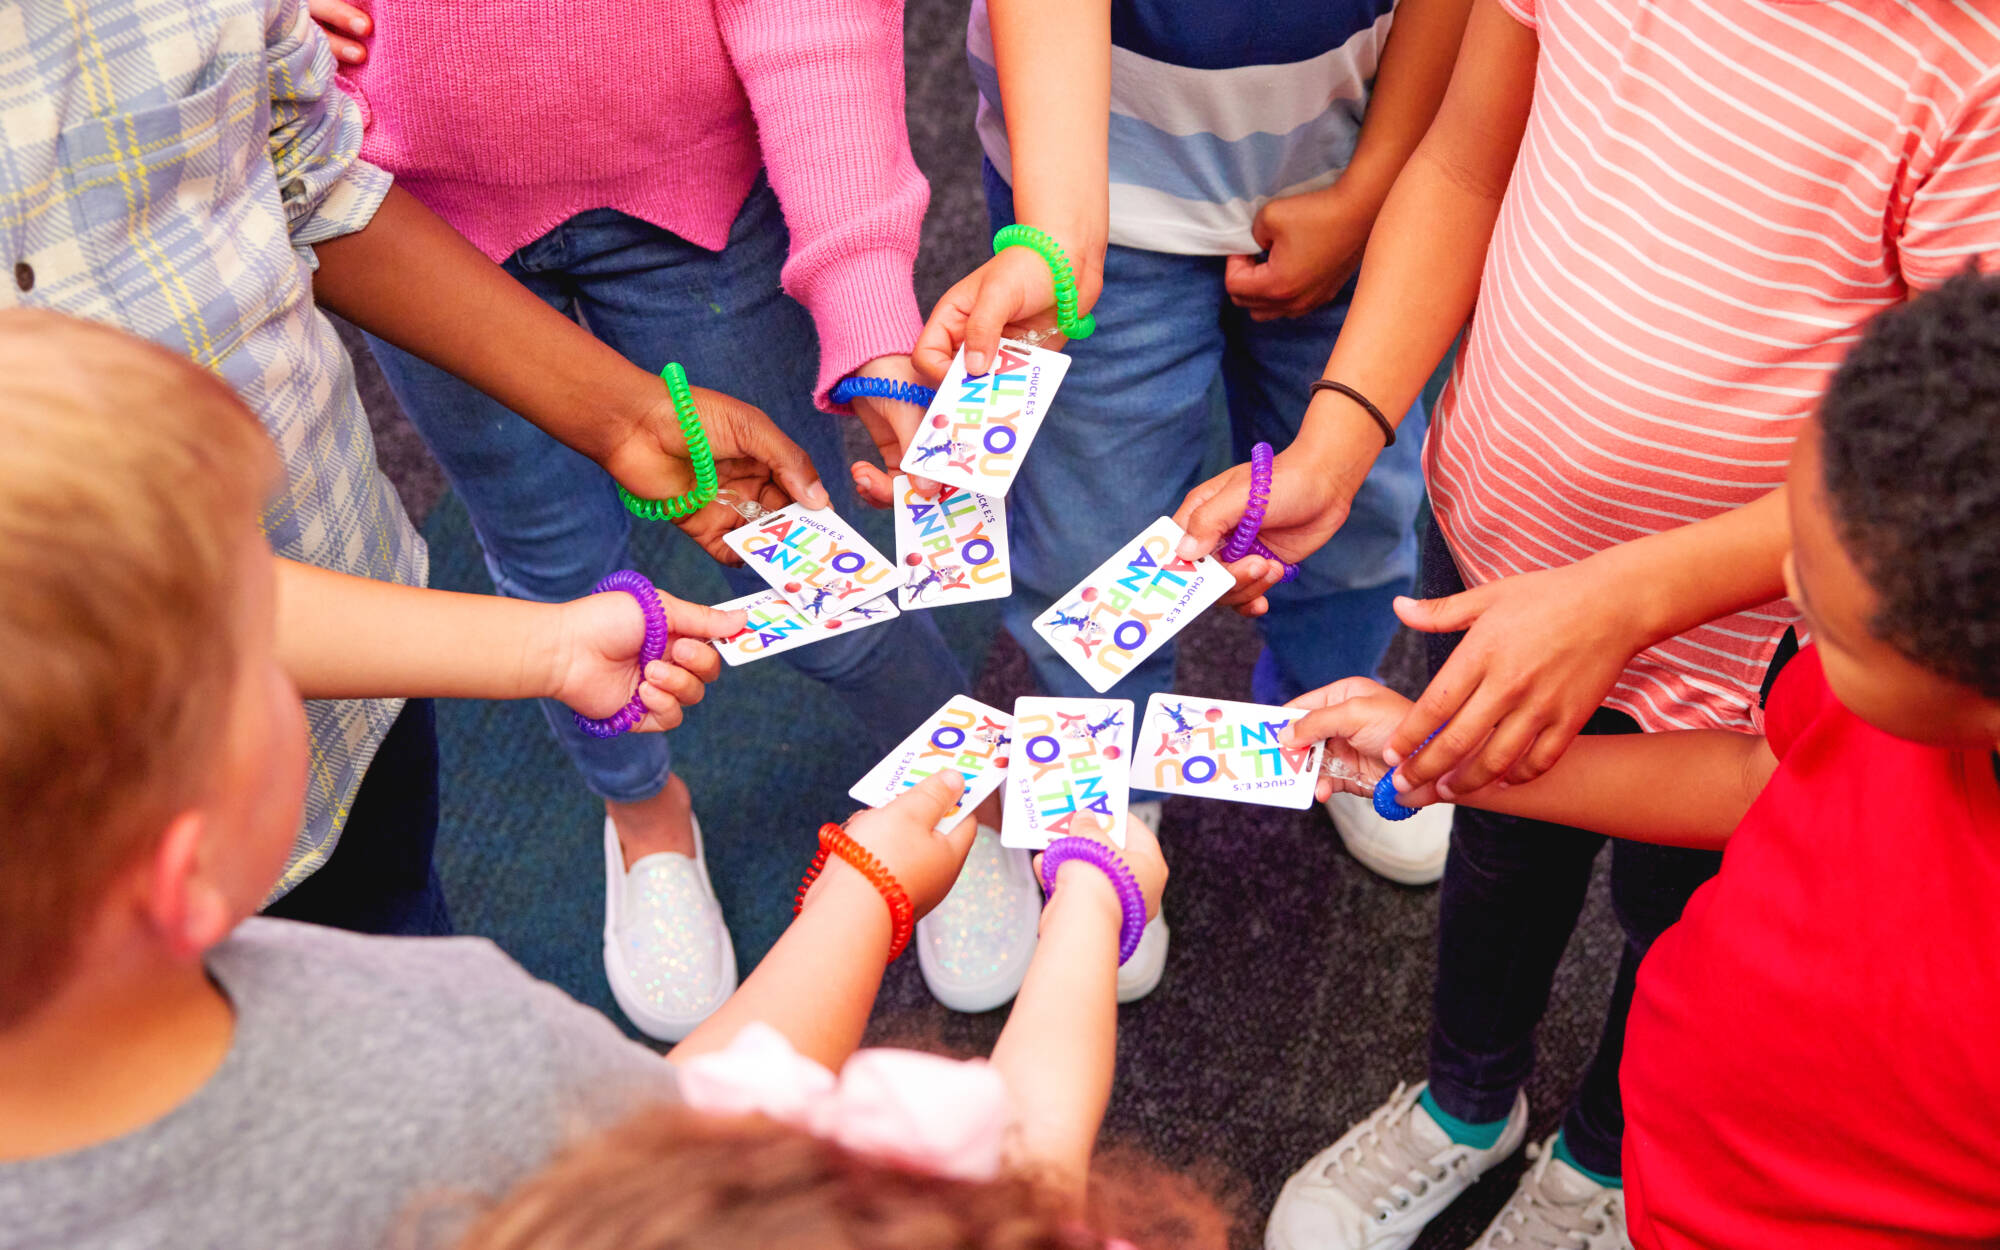 Kids holding fun passes in a circle ready to play at Chuck E. Cheese